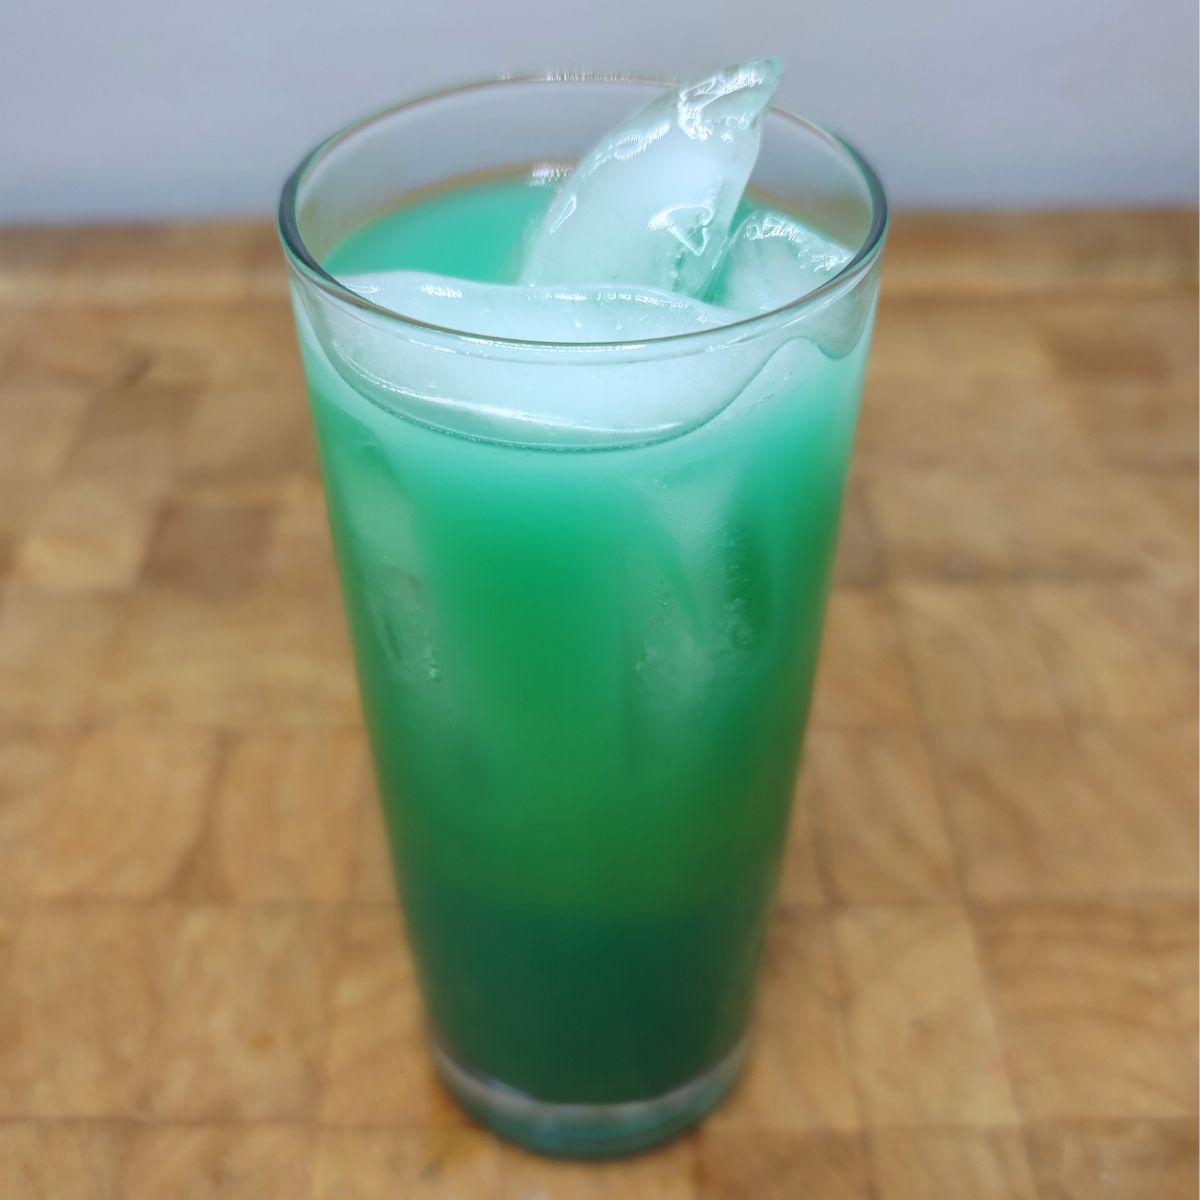 Fuzzy leprechaun drink in a highball glass on a wooden table.